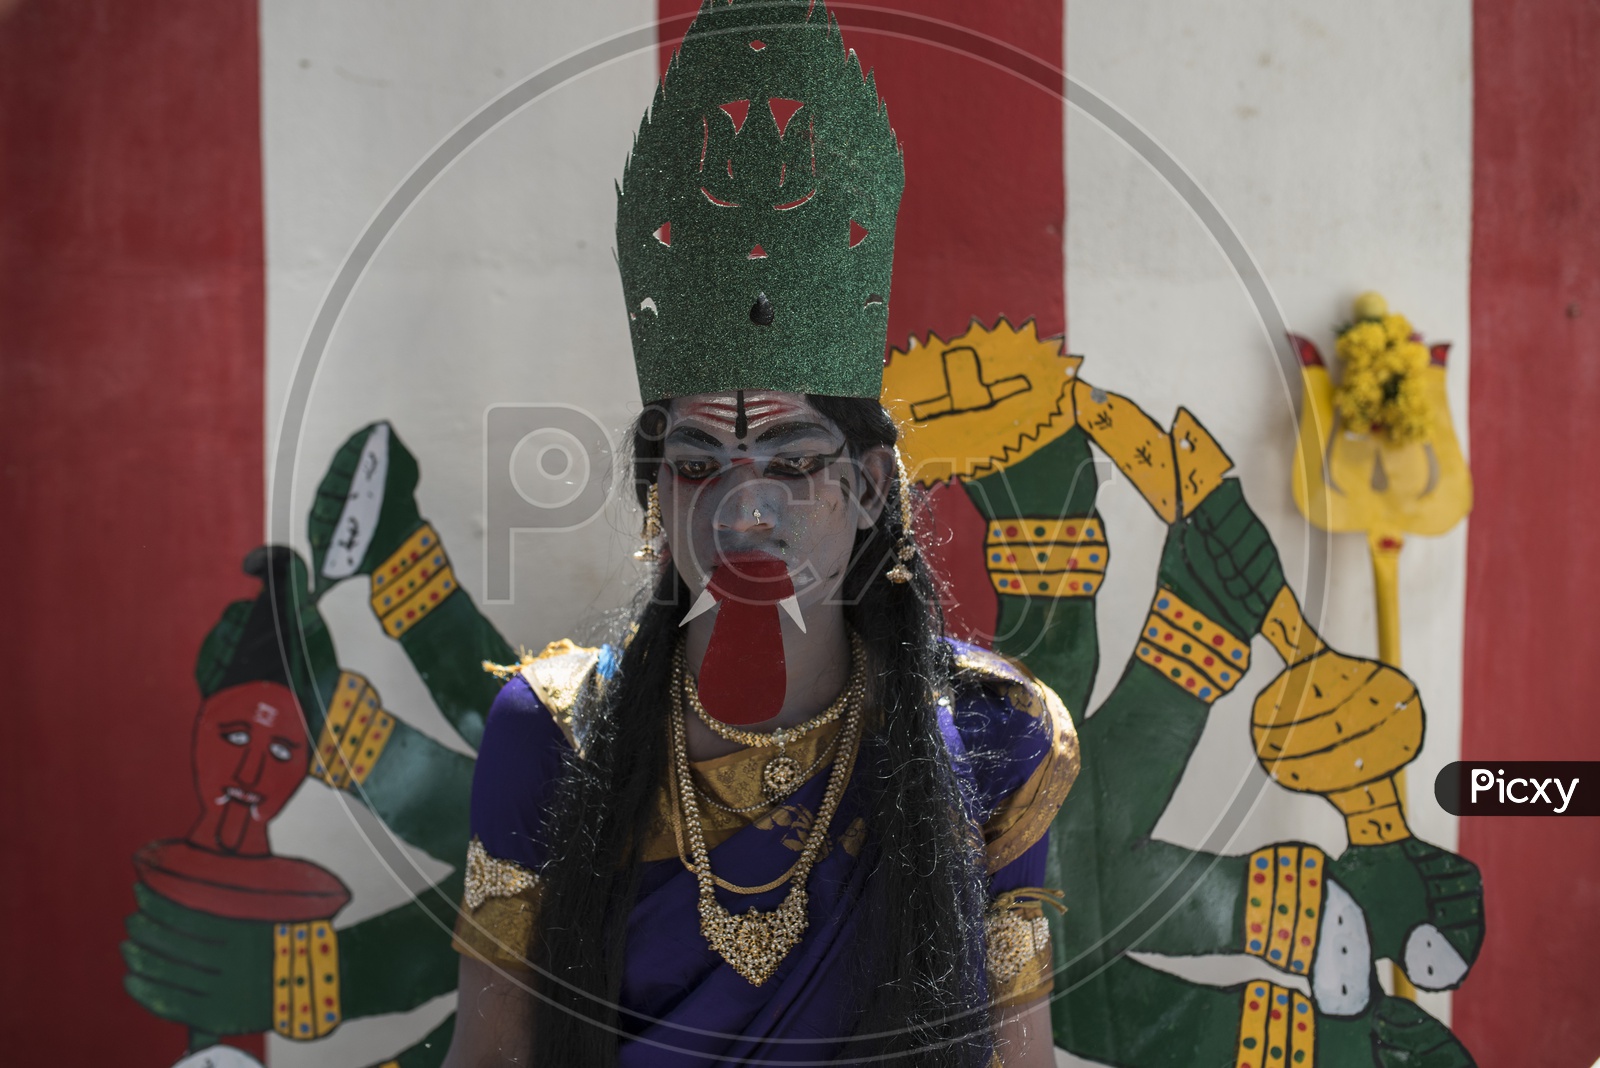 People dressed up as tradition in Kaveripattinam Angalamman Festival